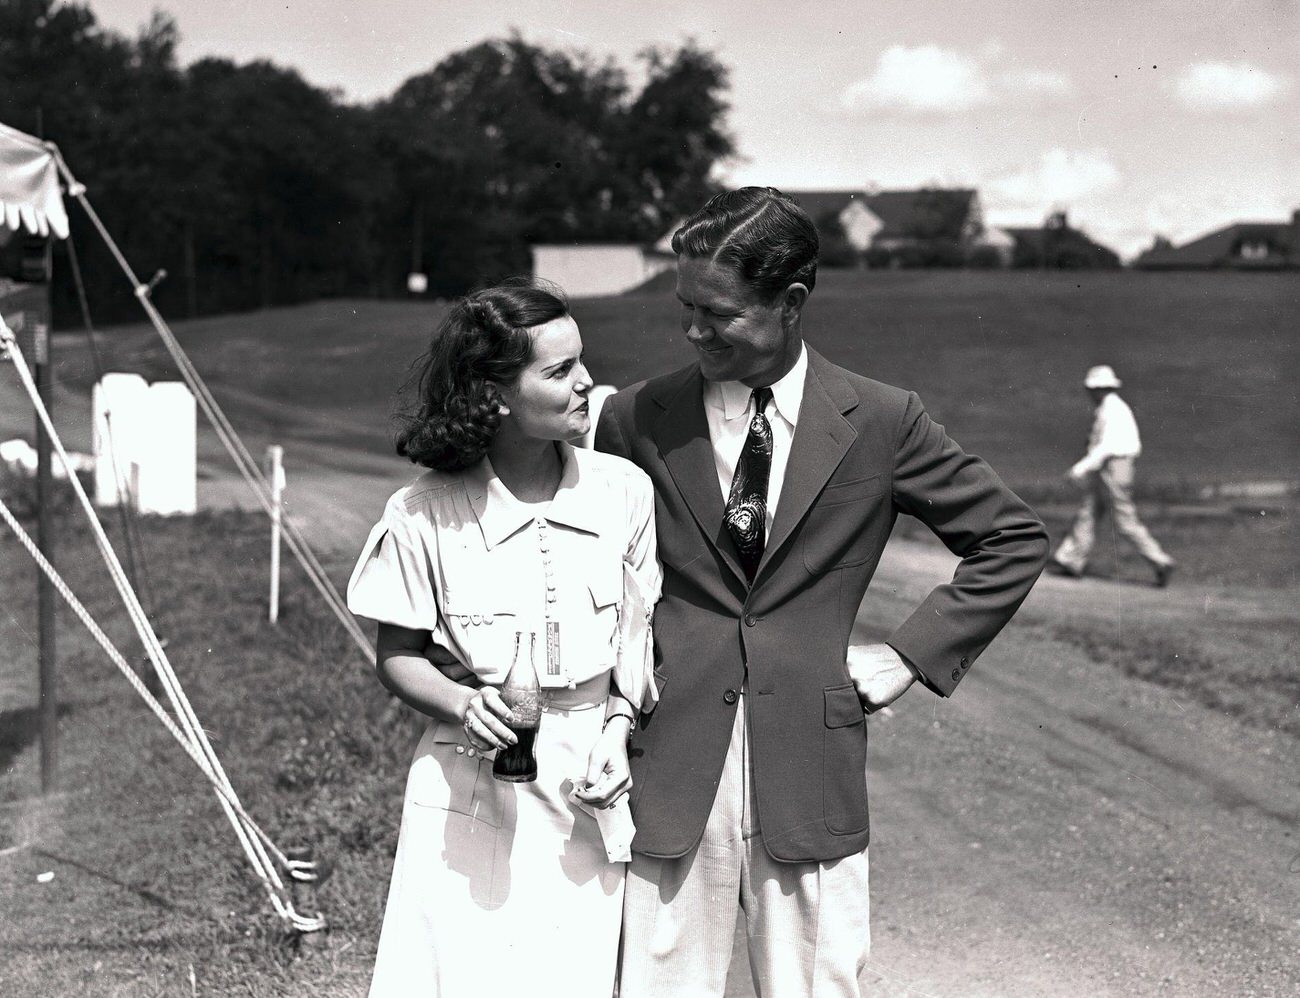 Byron Nelson with Mrs. Nelson, $10,000 Cleveland Open Golf Tournament, August 11.